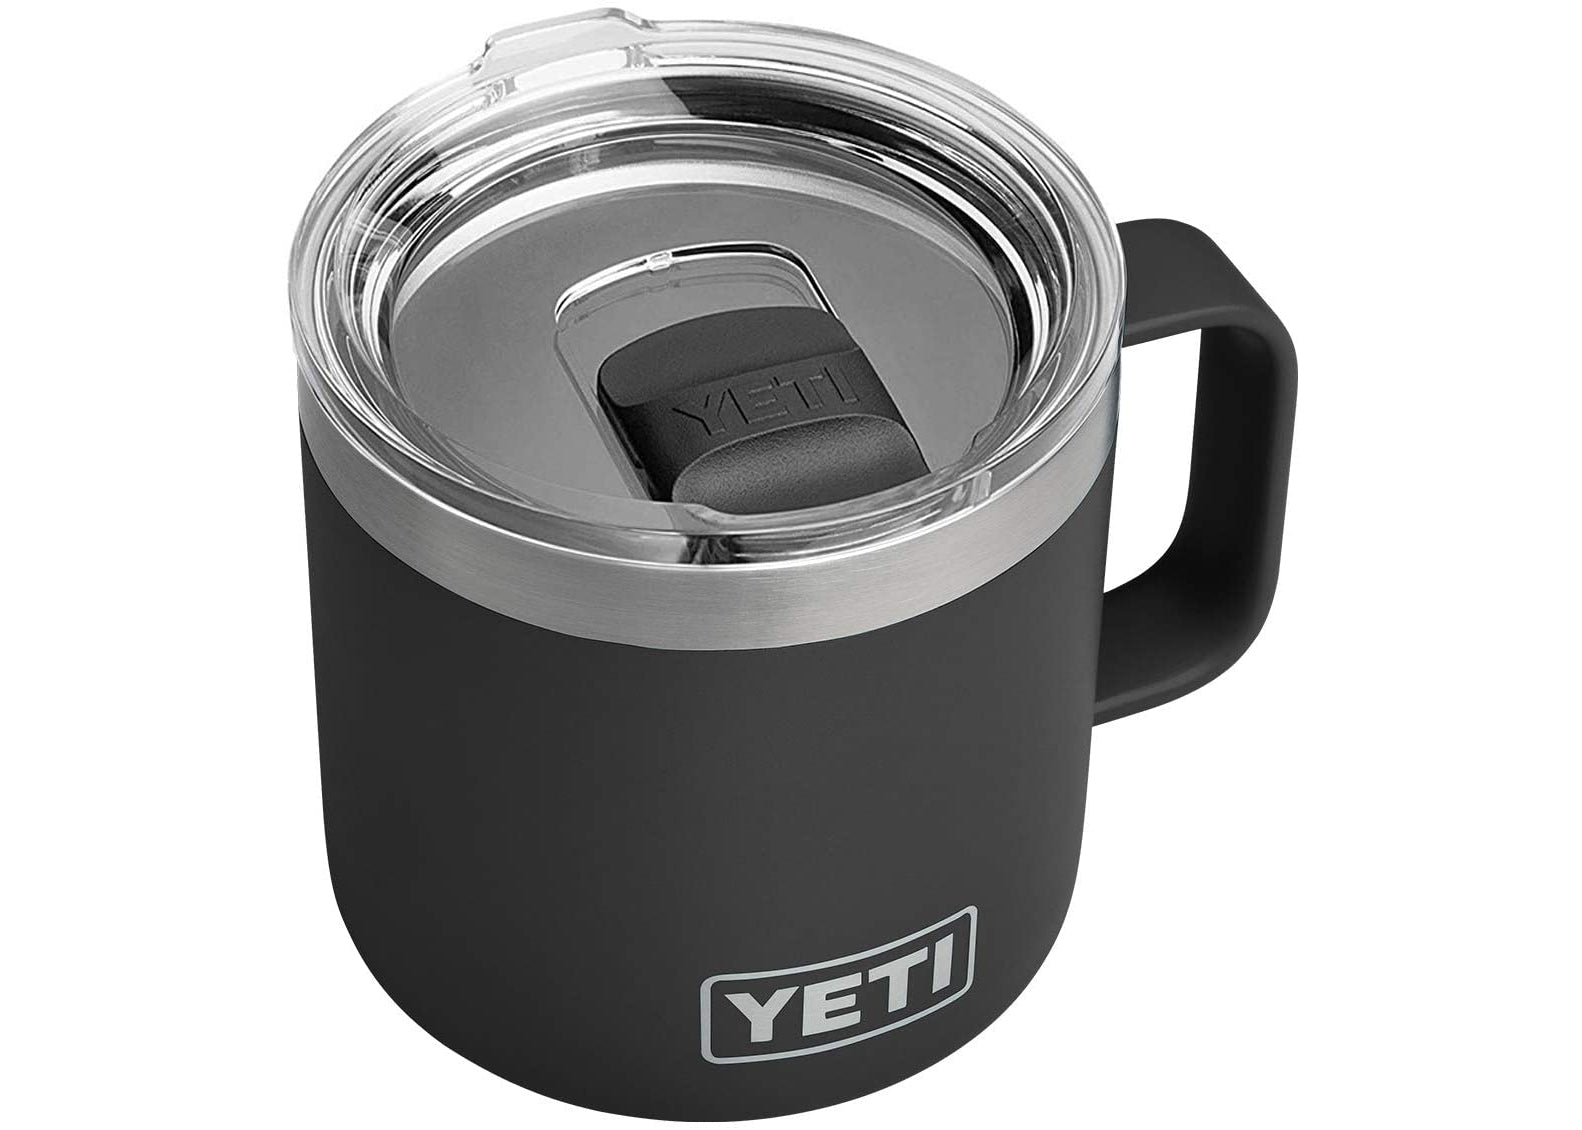 This is why I love the 14 oz mug so much : r/YetiCoolers